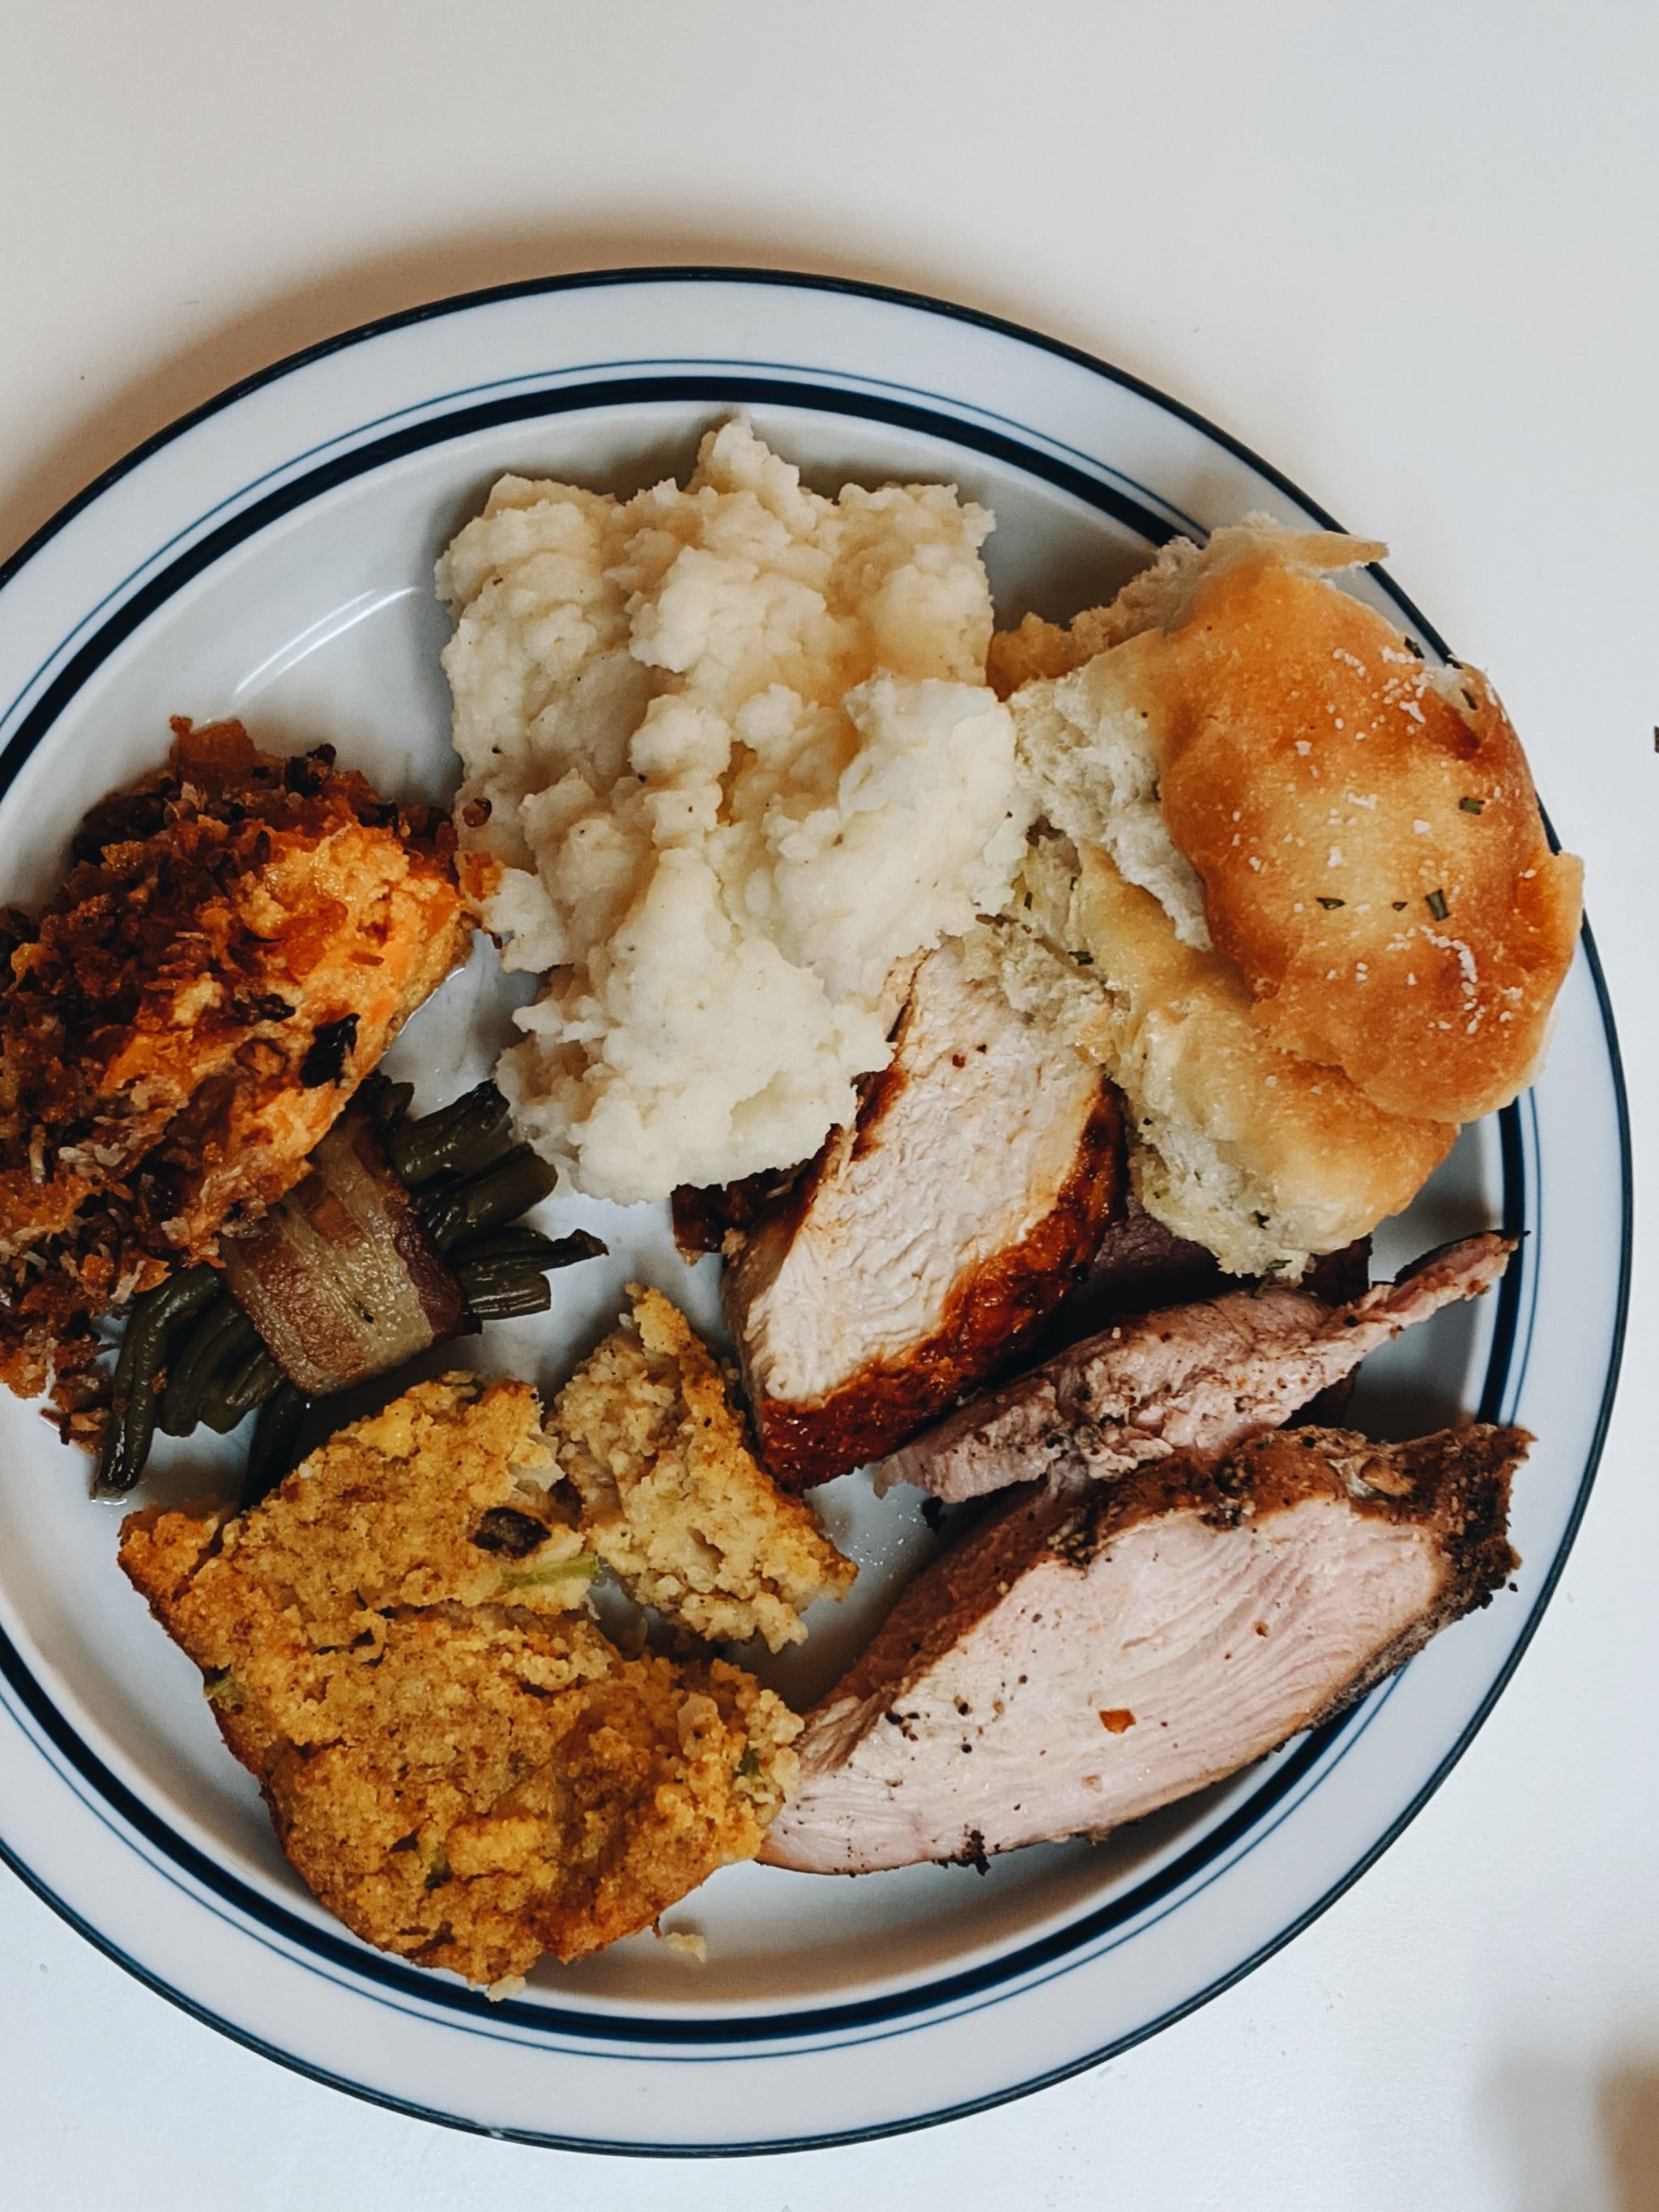 A plate of food including turkey, stuffing, mashed potatoes, and rolls. - Food, foodie